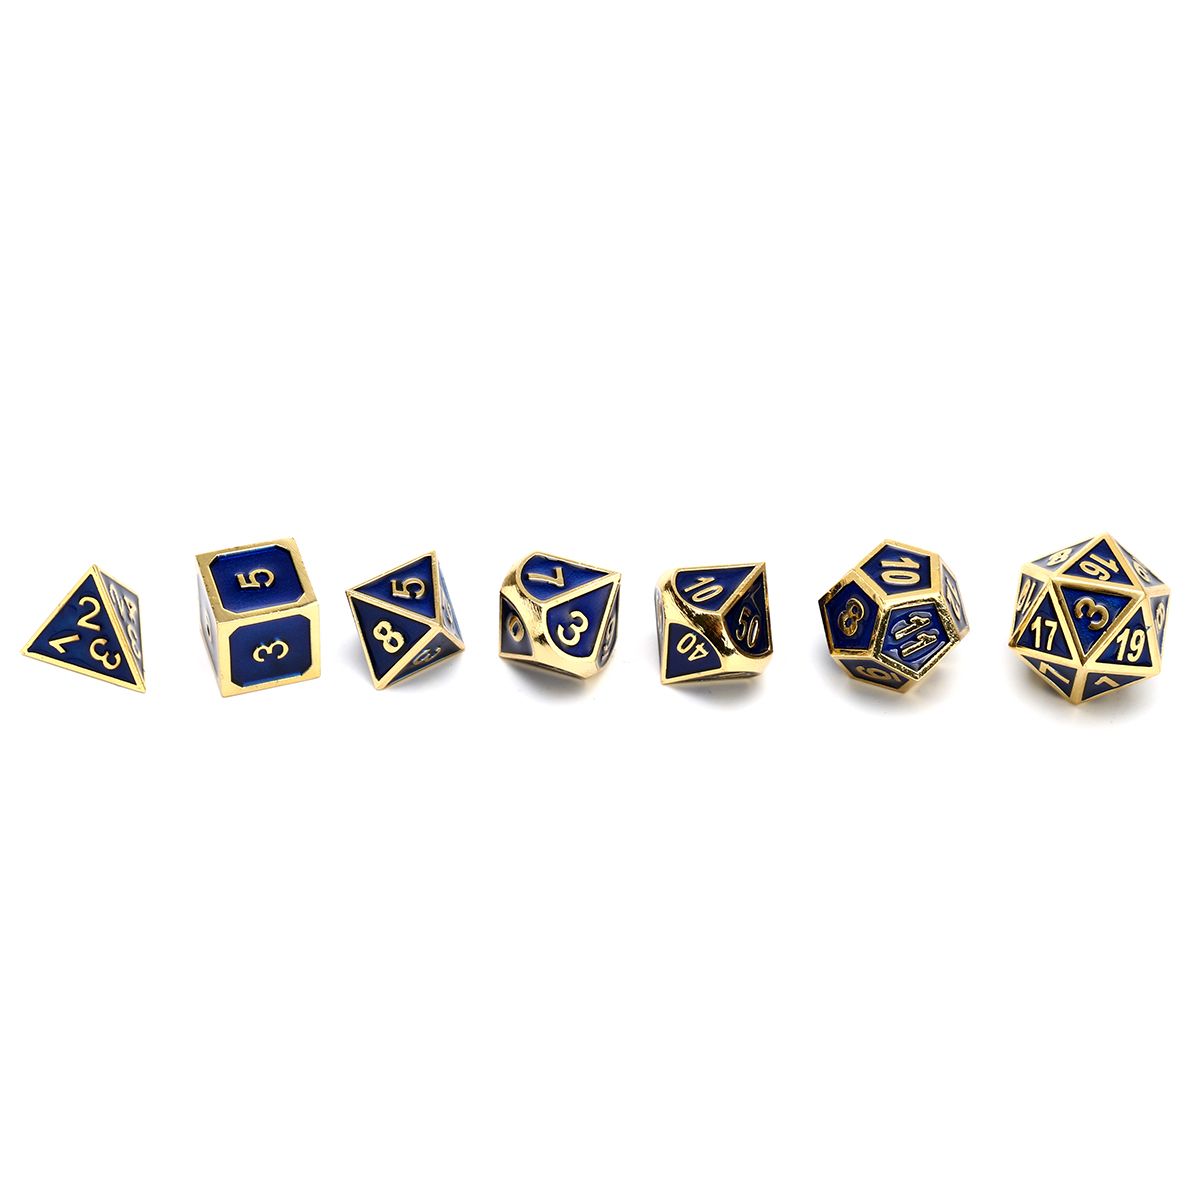 Antique-Color-Solid-Metal-Heavy-Dice-Set-Polyhedral-Dice-Role-Playing-Games-Dice-Gadget-RPG-1262933